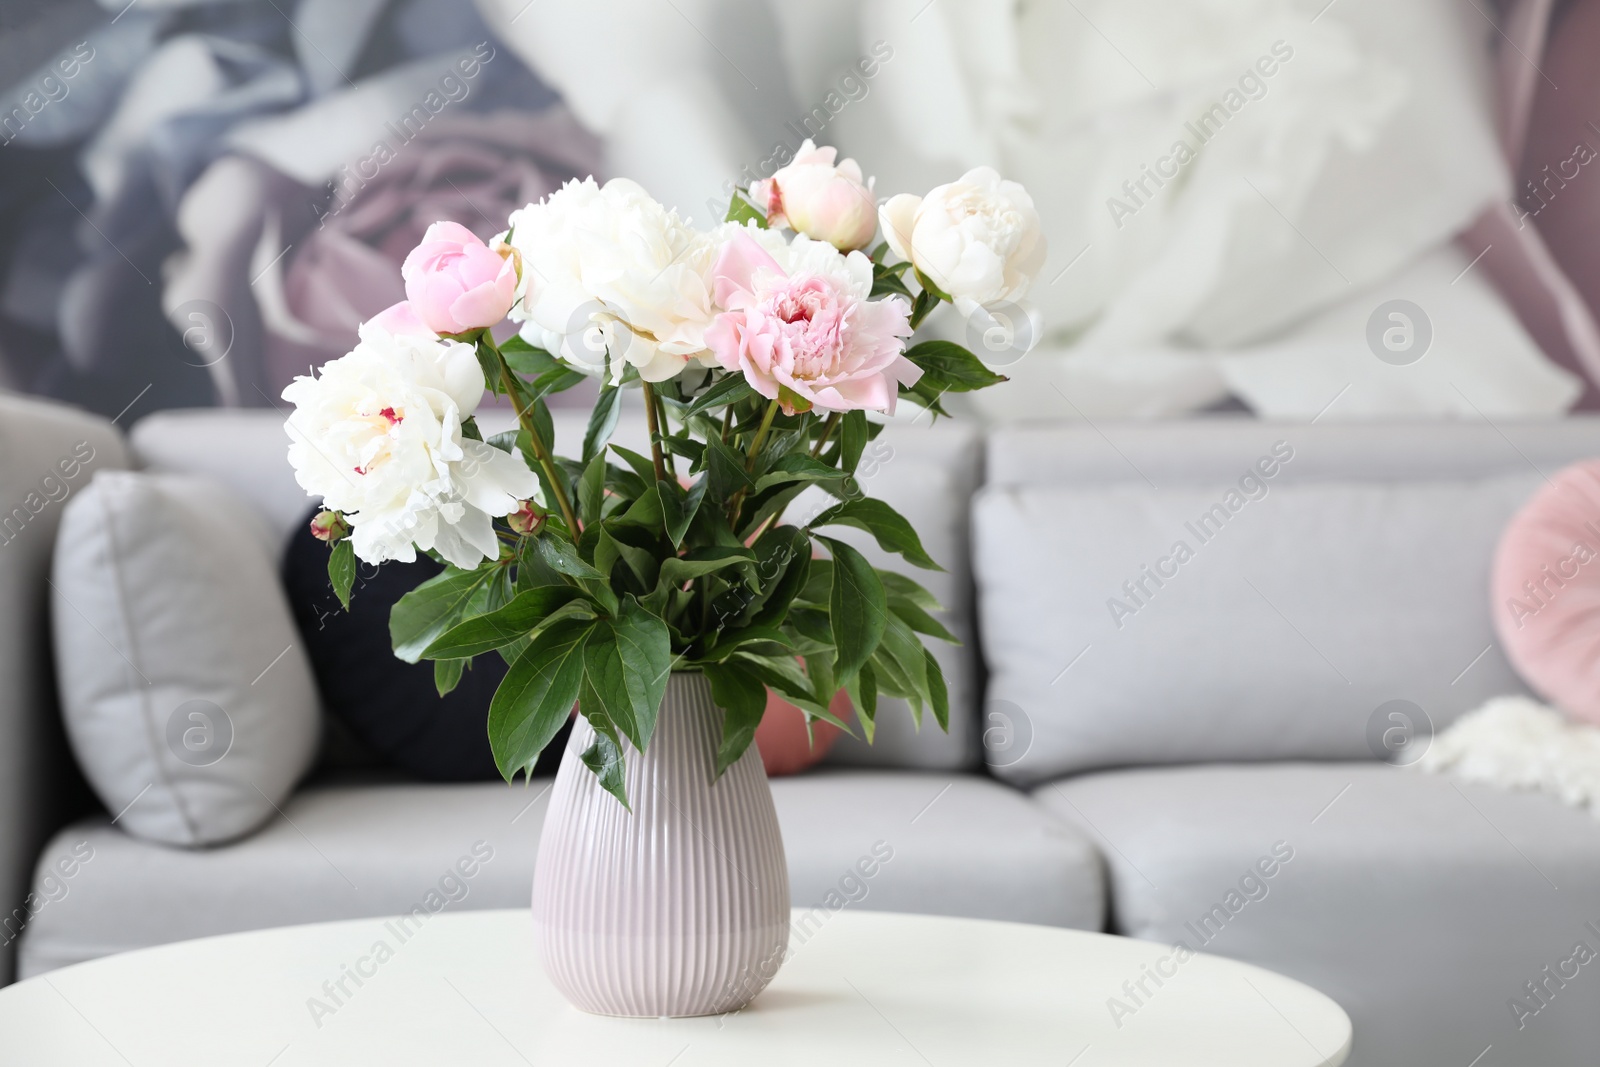 Photo of Bouquet of peonies on table near sofa in modern room. Interior design